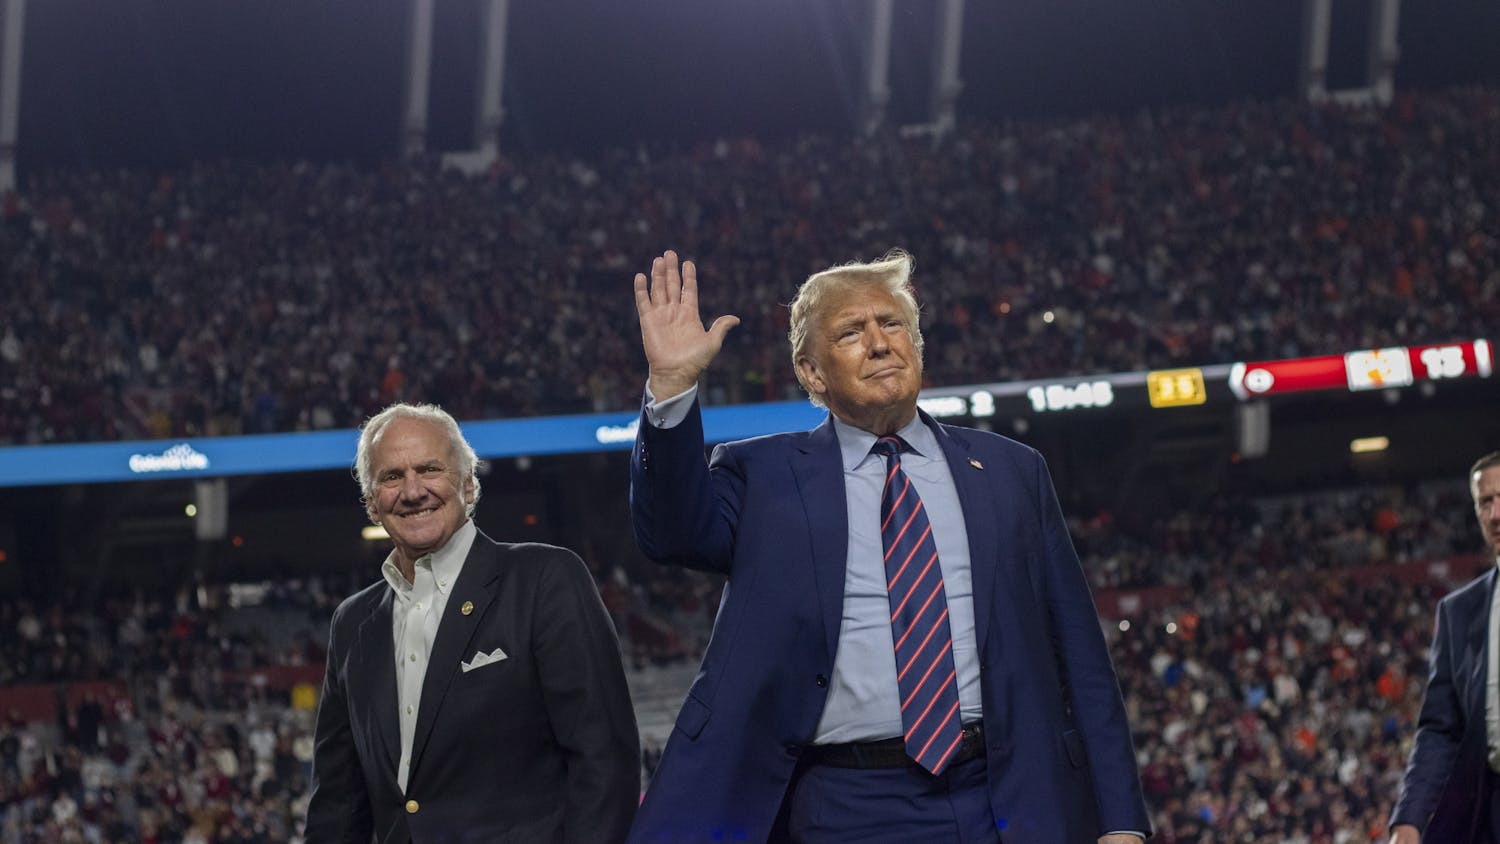 Donald Trump, the 45th president of the United States, waves with South Carolina Gov. Henry McMaster at Williams-Brice Stadium on Nov. 25, 2023. His appearance drew a mixture of praises and boos from the crowd. 